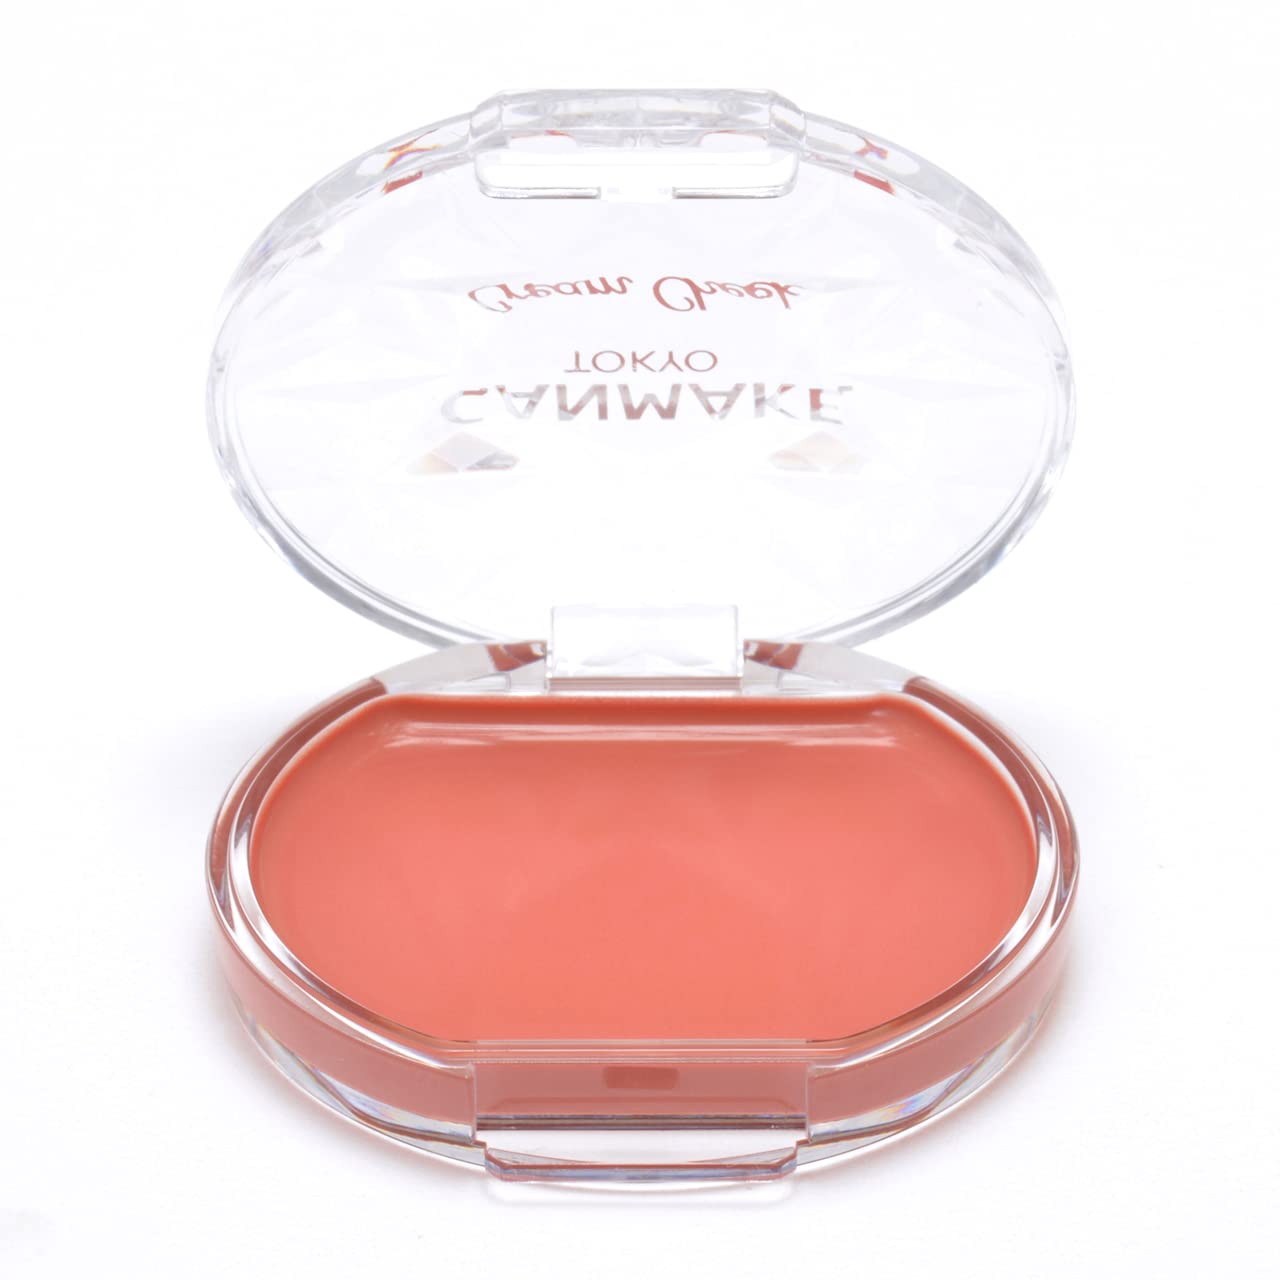 Canmake Tangerine Tea Cream Cheek 21 – Smooth Blendable Blush by Canmake